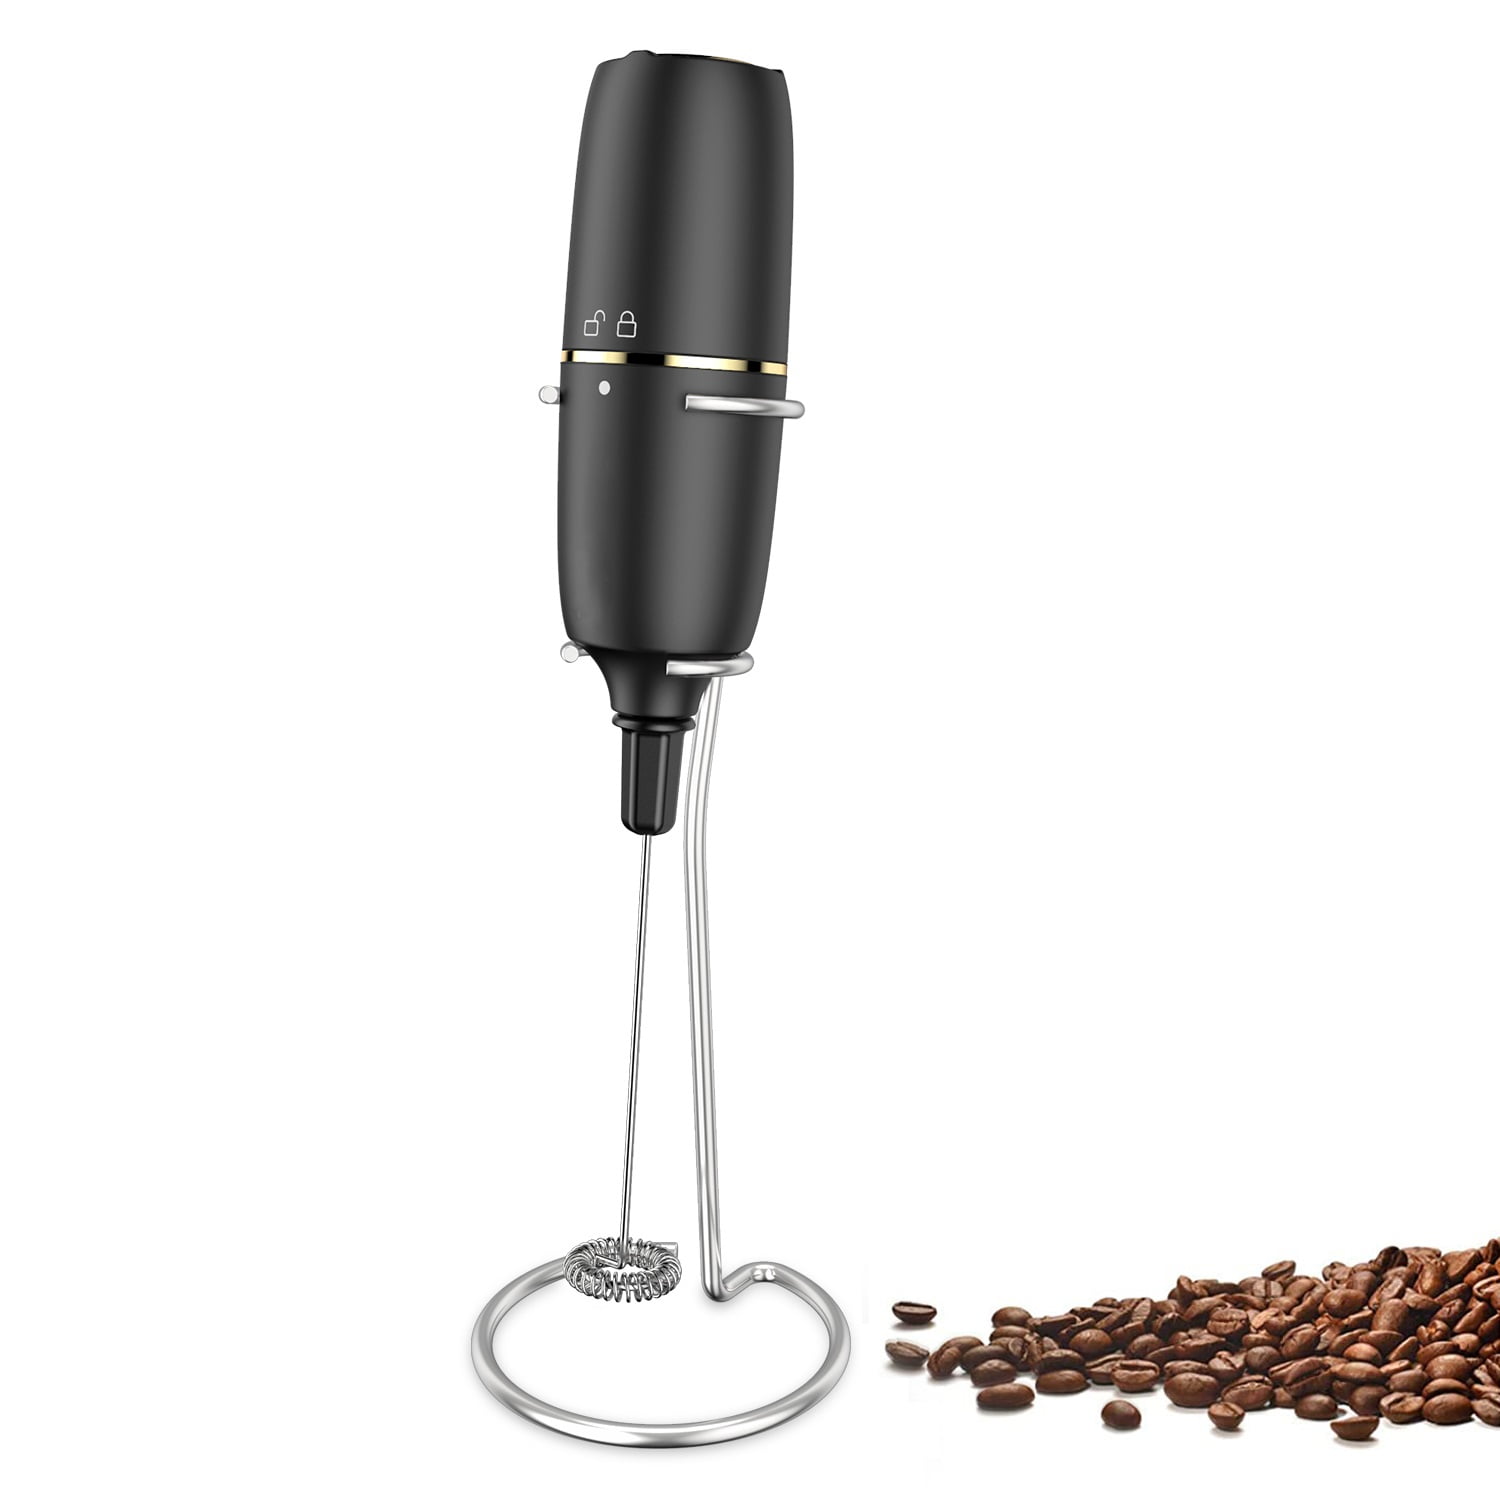 ULTRA HIGH SPEED MILK FROTHER For Coffee With NEW UPGRADED STAND -  Powerful, Compact Handheld Mixer with Infinite Uses - Super Instant  Electric Foam